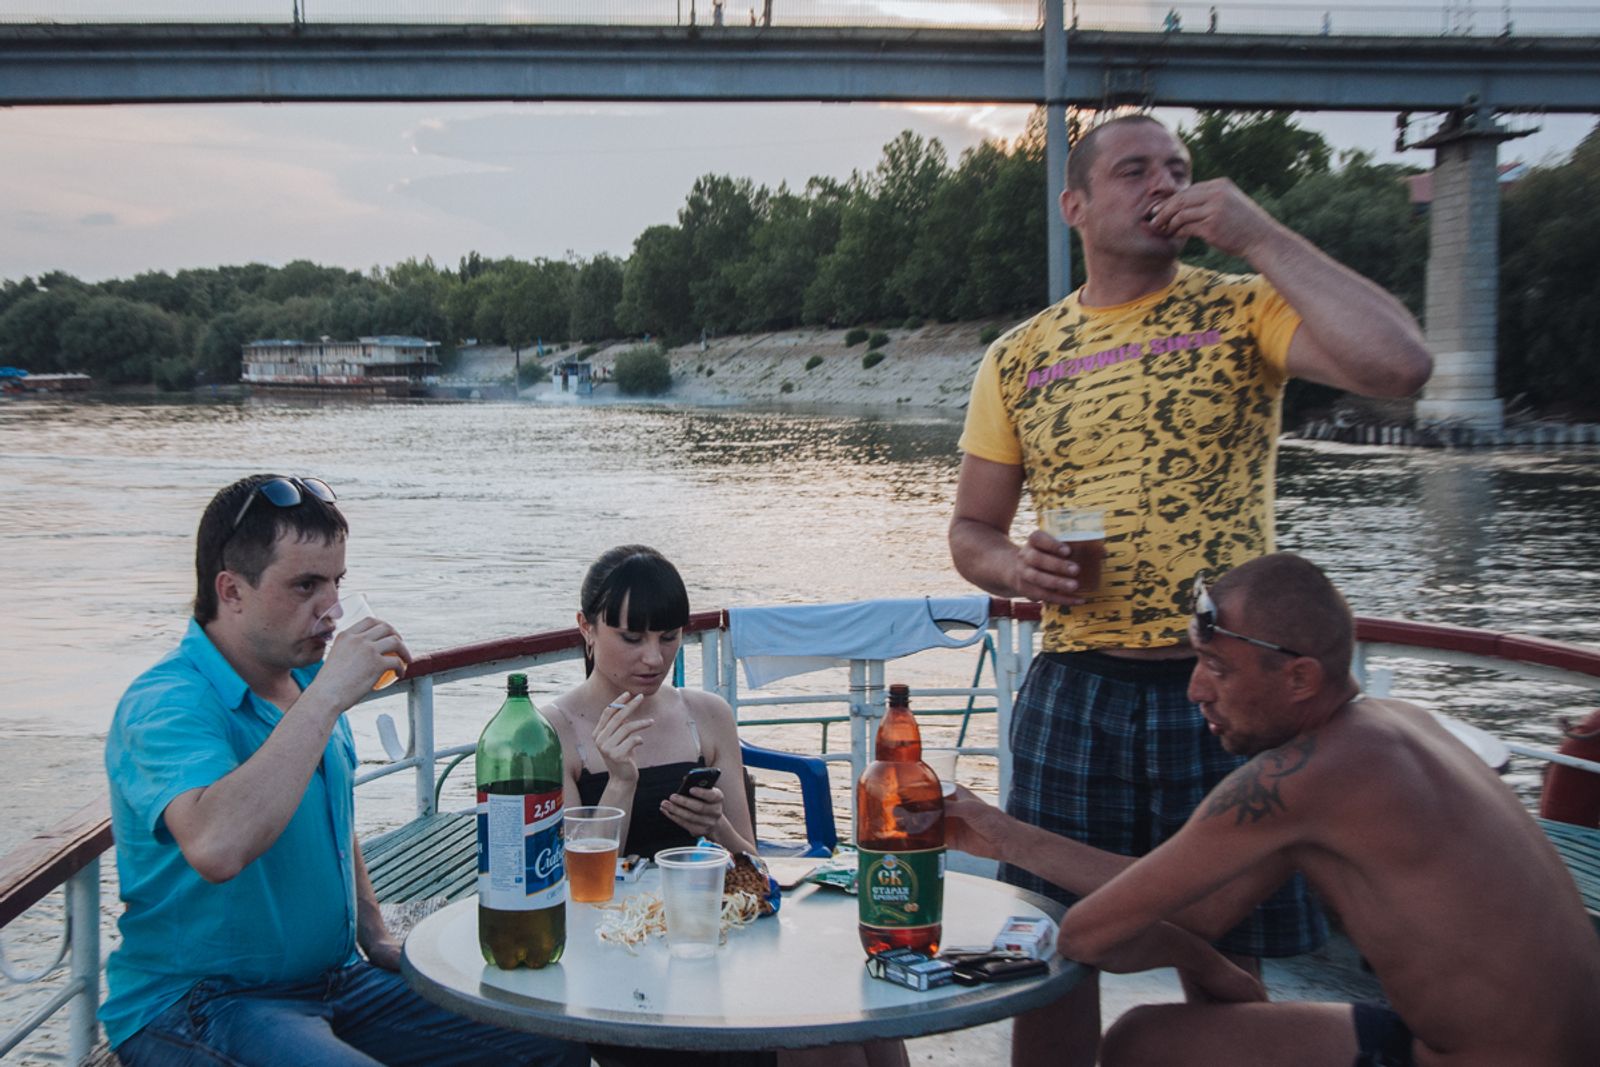 © Anton Polyakov - A “pleasure boat” on the river Dniester, near the city of Tiraspol -- a popular pastime for residents during the summer.